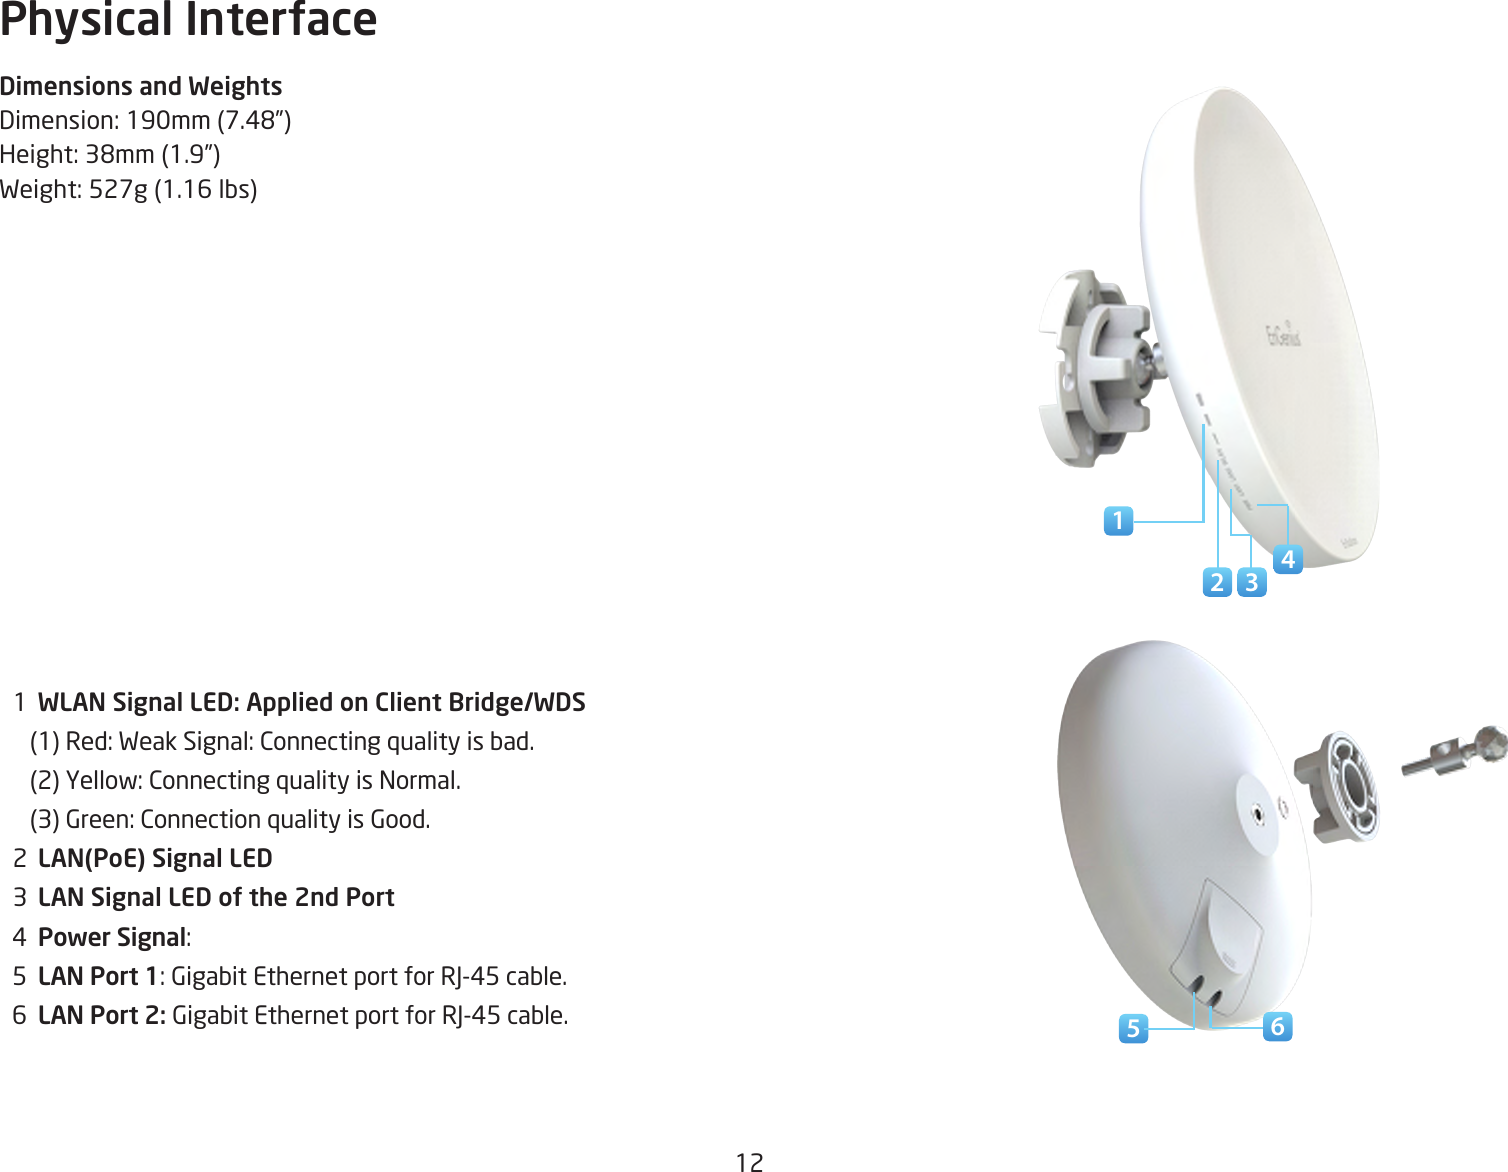 12Physical InterfaceDimensions and WeightsDimension:190mm(7.48”)Height:38mm(1.9”)Weight:527g(1.16lbs)  1  WLAN Signal LED: Applied on Client Bridge/WDS(1)Red:WeakSignal:Connectingqualityisbad.(2)Yellow:ConnectingqualityisNormal.(3)Green:ConnectionqualityisGood.  2  LAN(PoE) Signal LED  3  LAN Signal LED of the 2nd Port  4  Power Signal:   5  LAN Port 1: Gigabit Ethernet port for RJ-45 cable.  6  LAN Port 2: Gigabit Ethernet port for RJ-45 cable. 54162 3